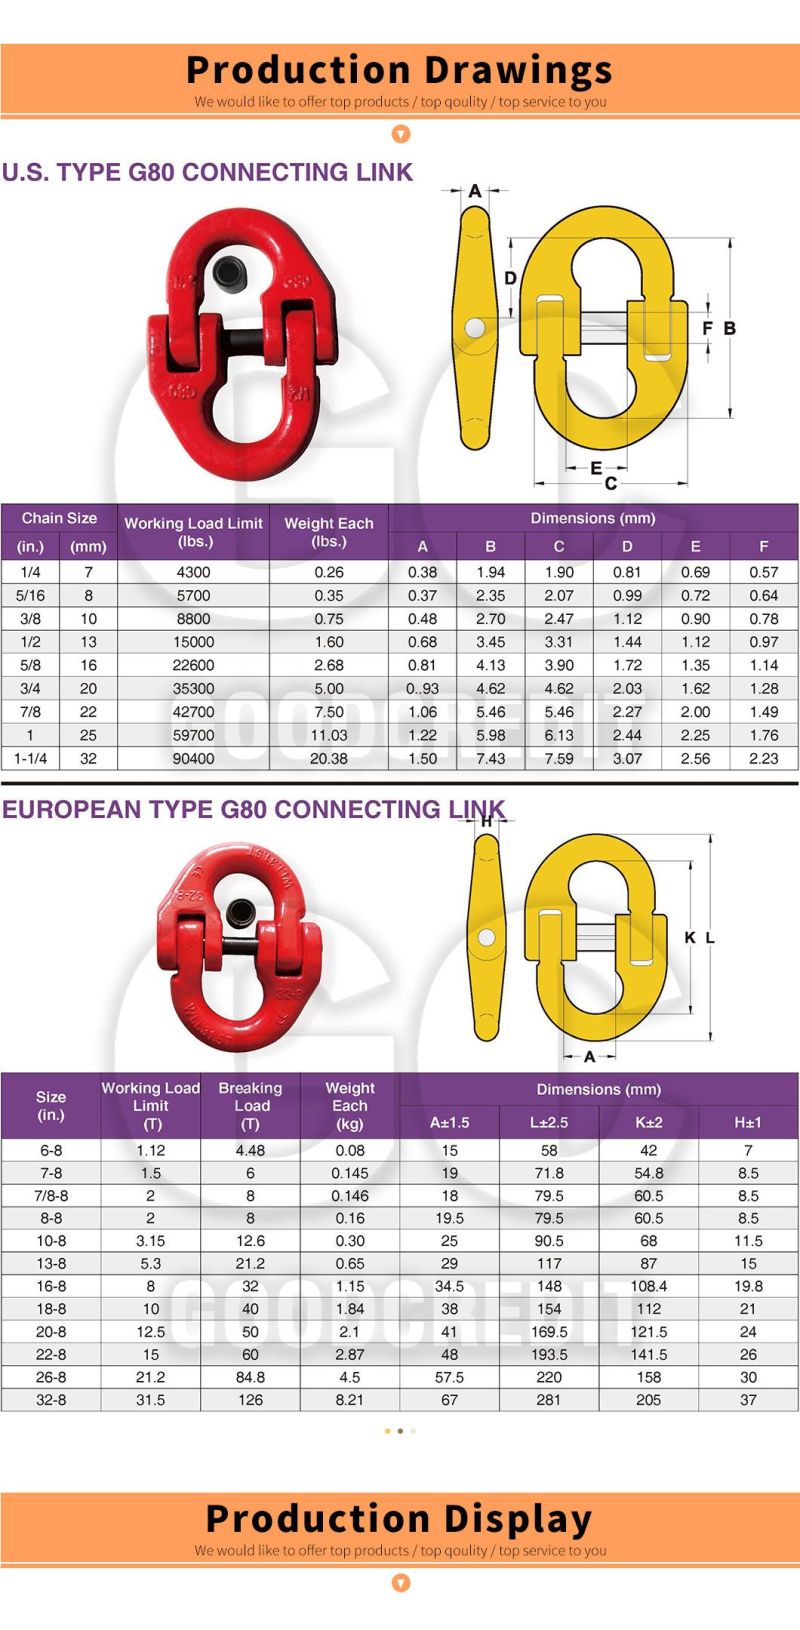 European Type Connecting Link